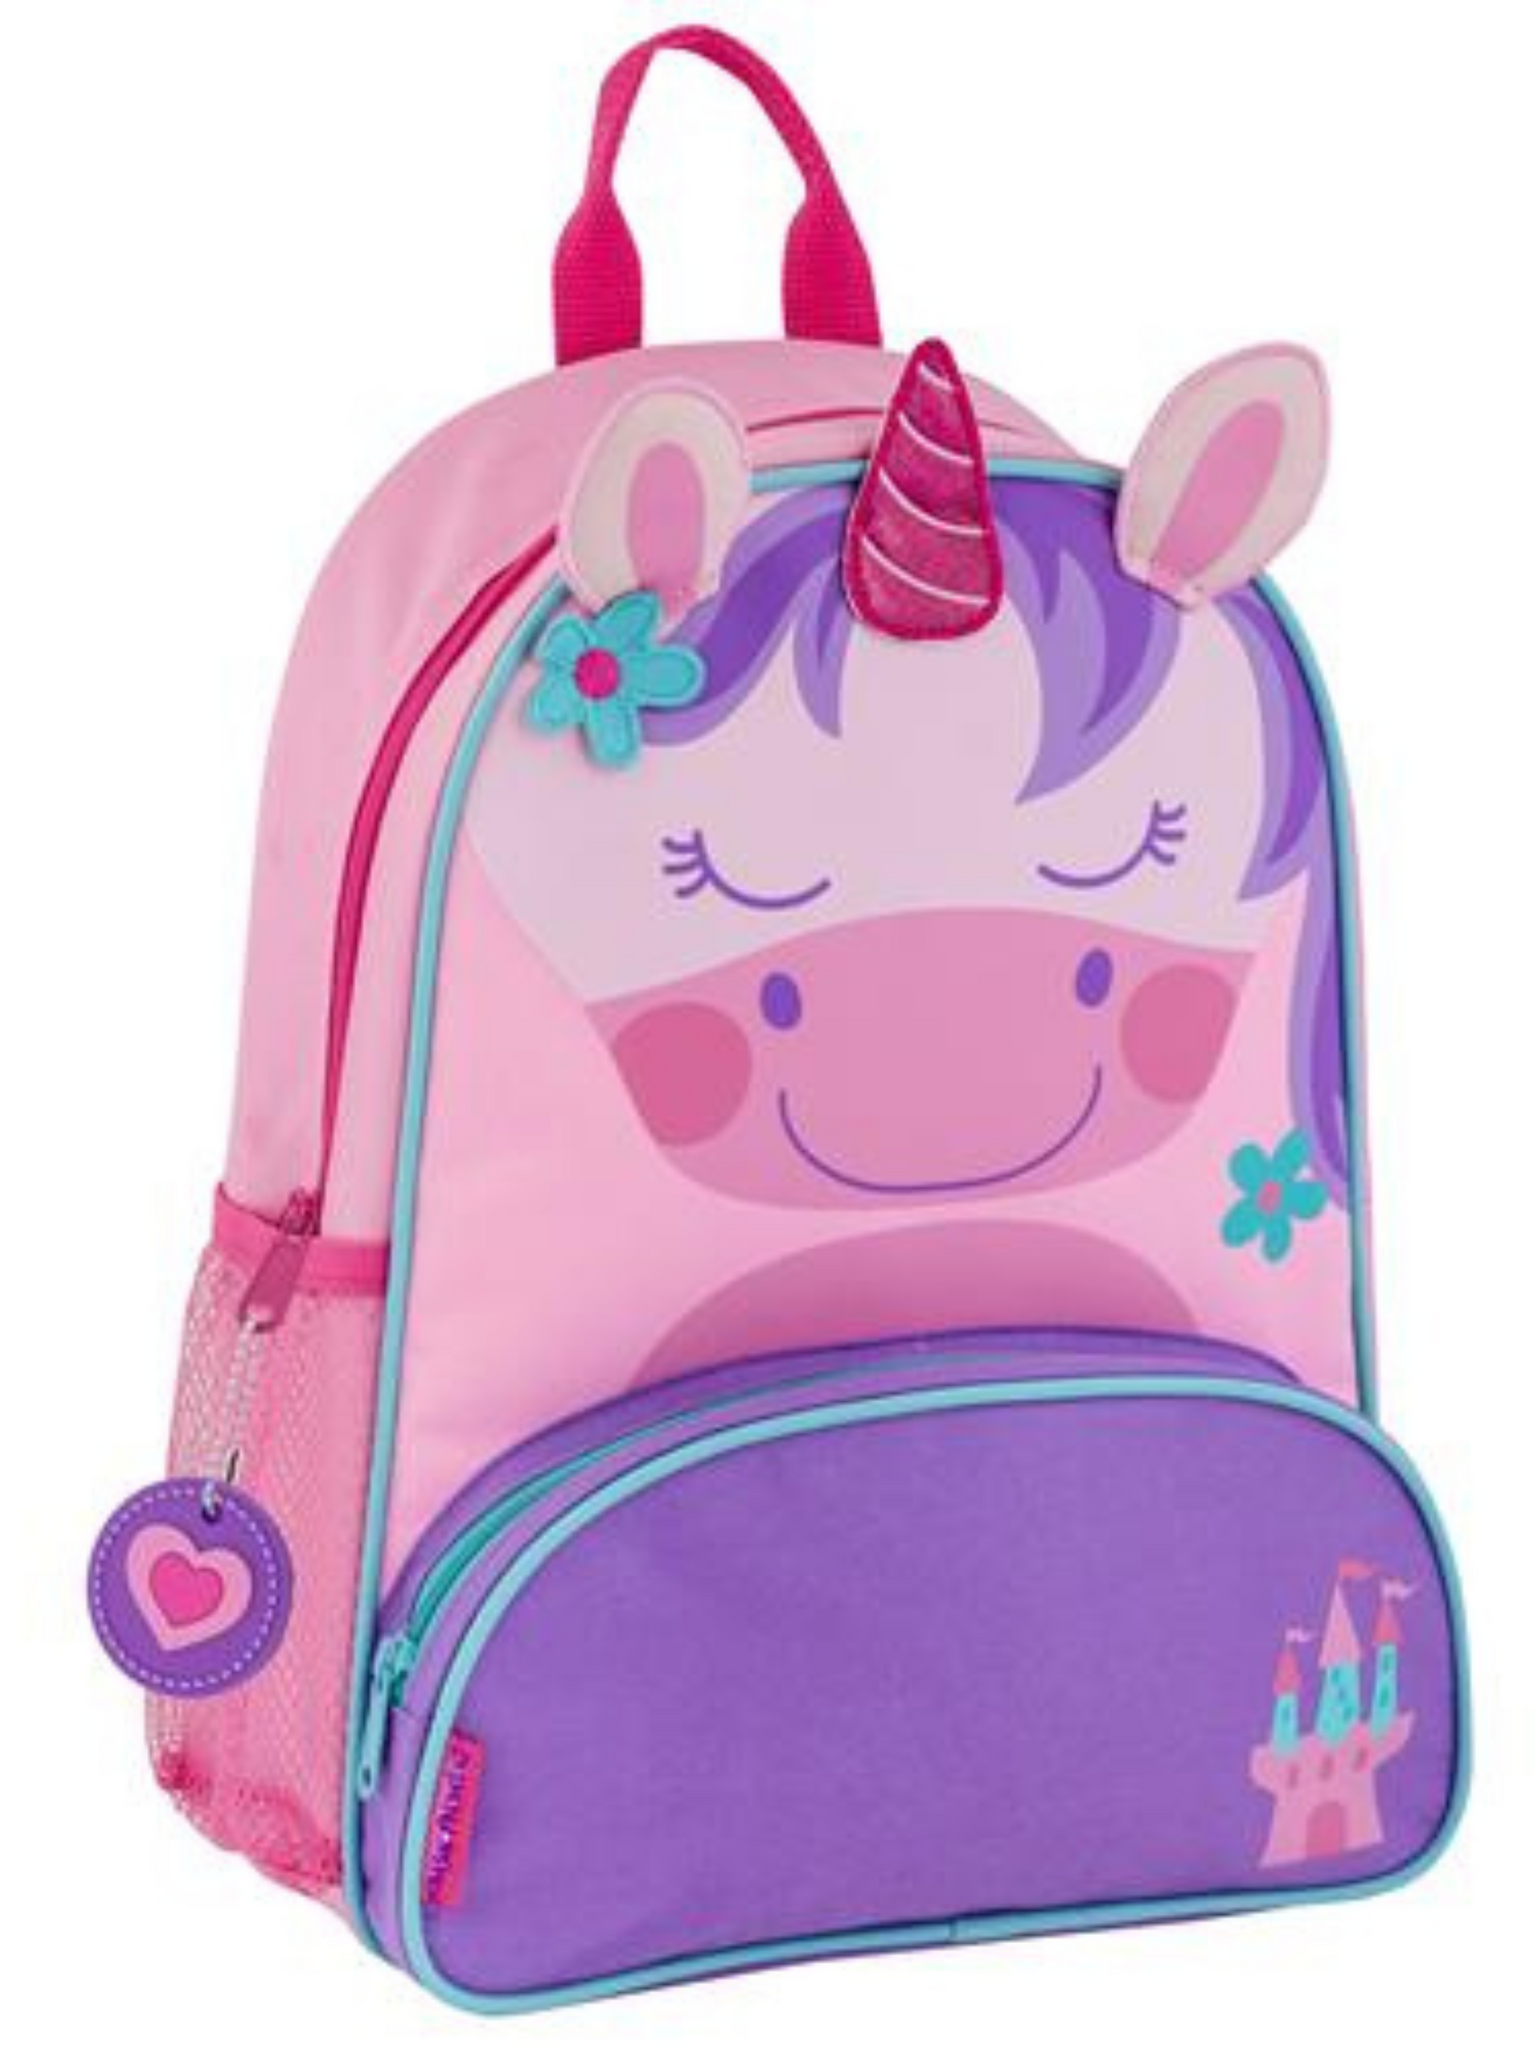 Stephen Joseph Kids Quilted Backpack, Unicorn, One Size